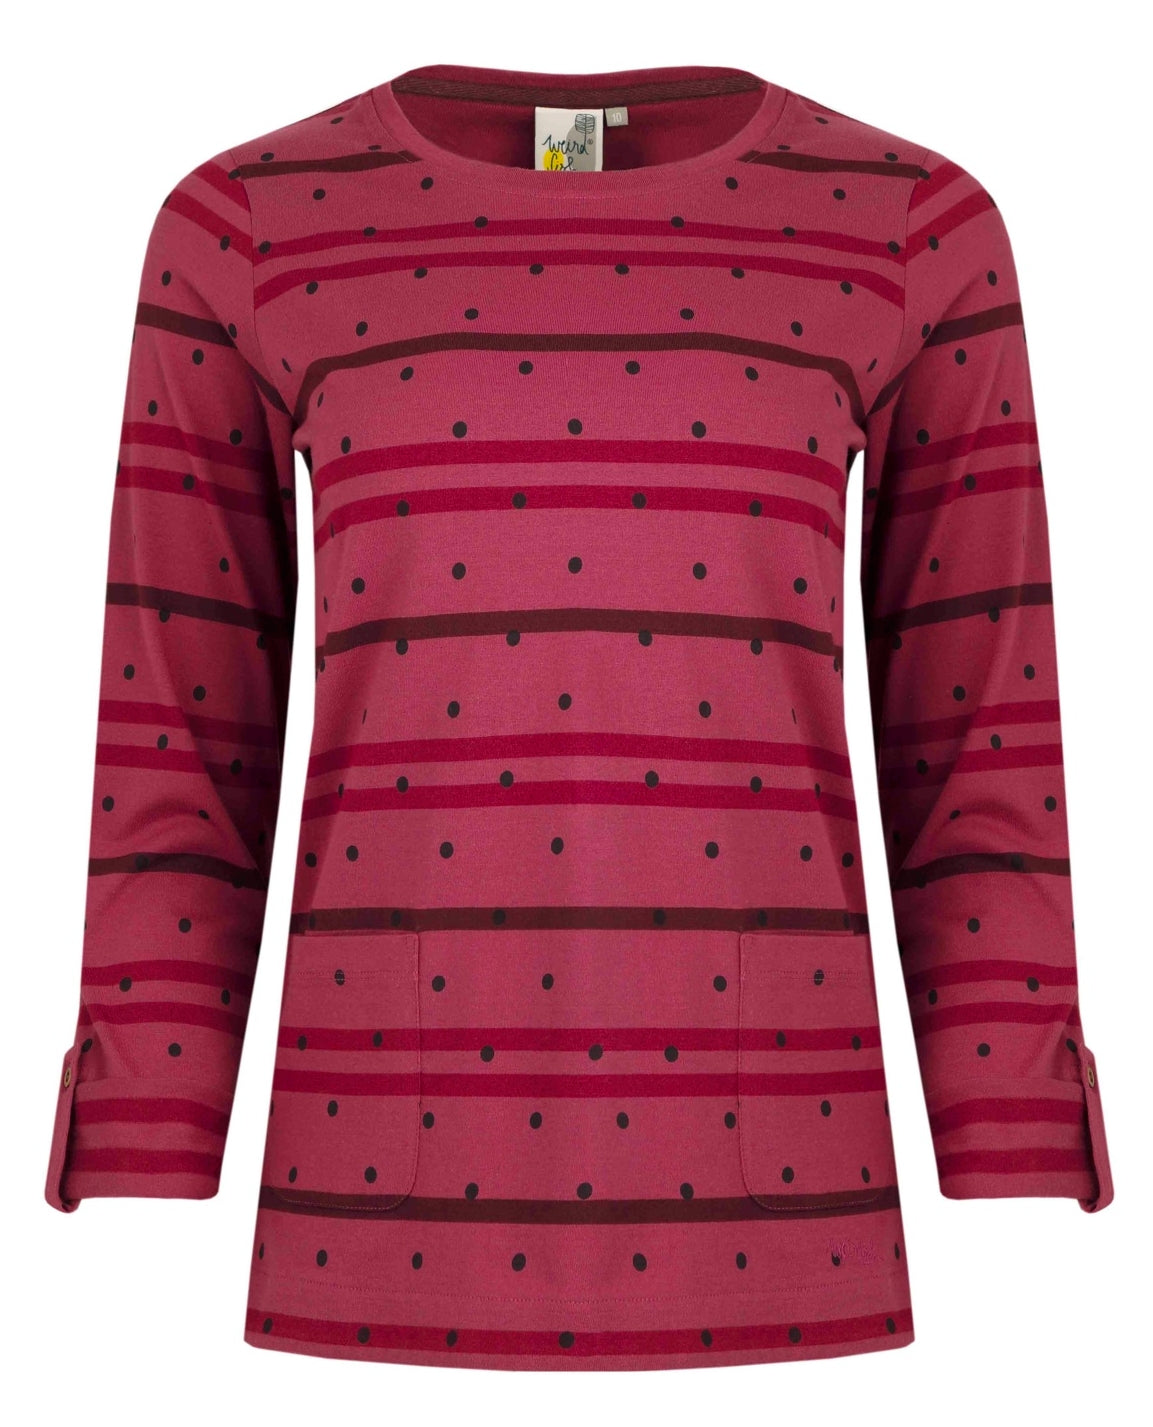 A long sleeve women's Billie t-shirt from Weird Fish in Crushed Berry with a stripe and dotty pattern, with a crew neckline and roll up sleeves.